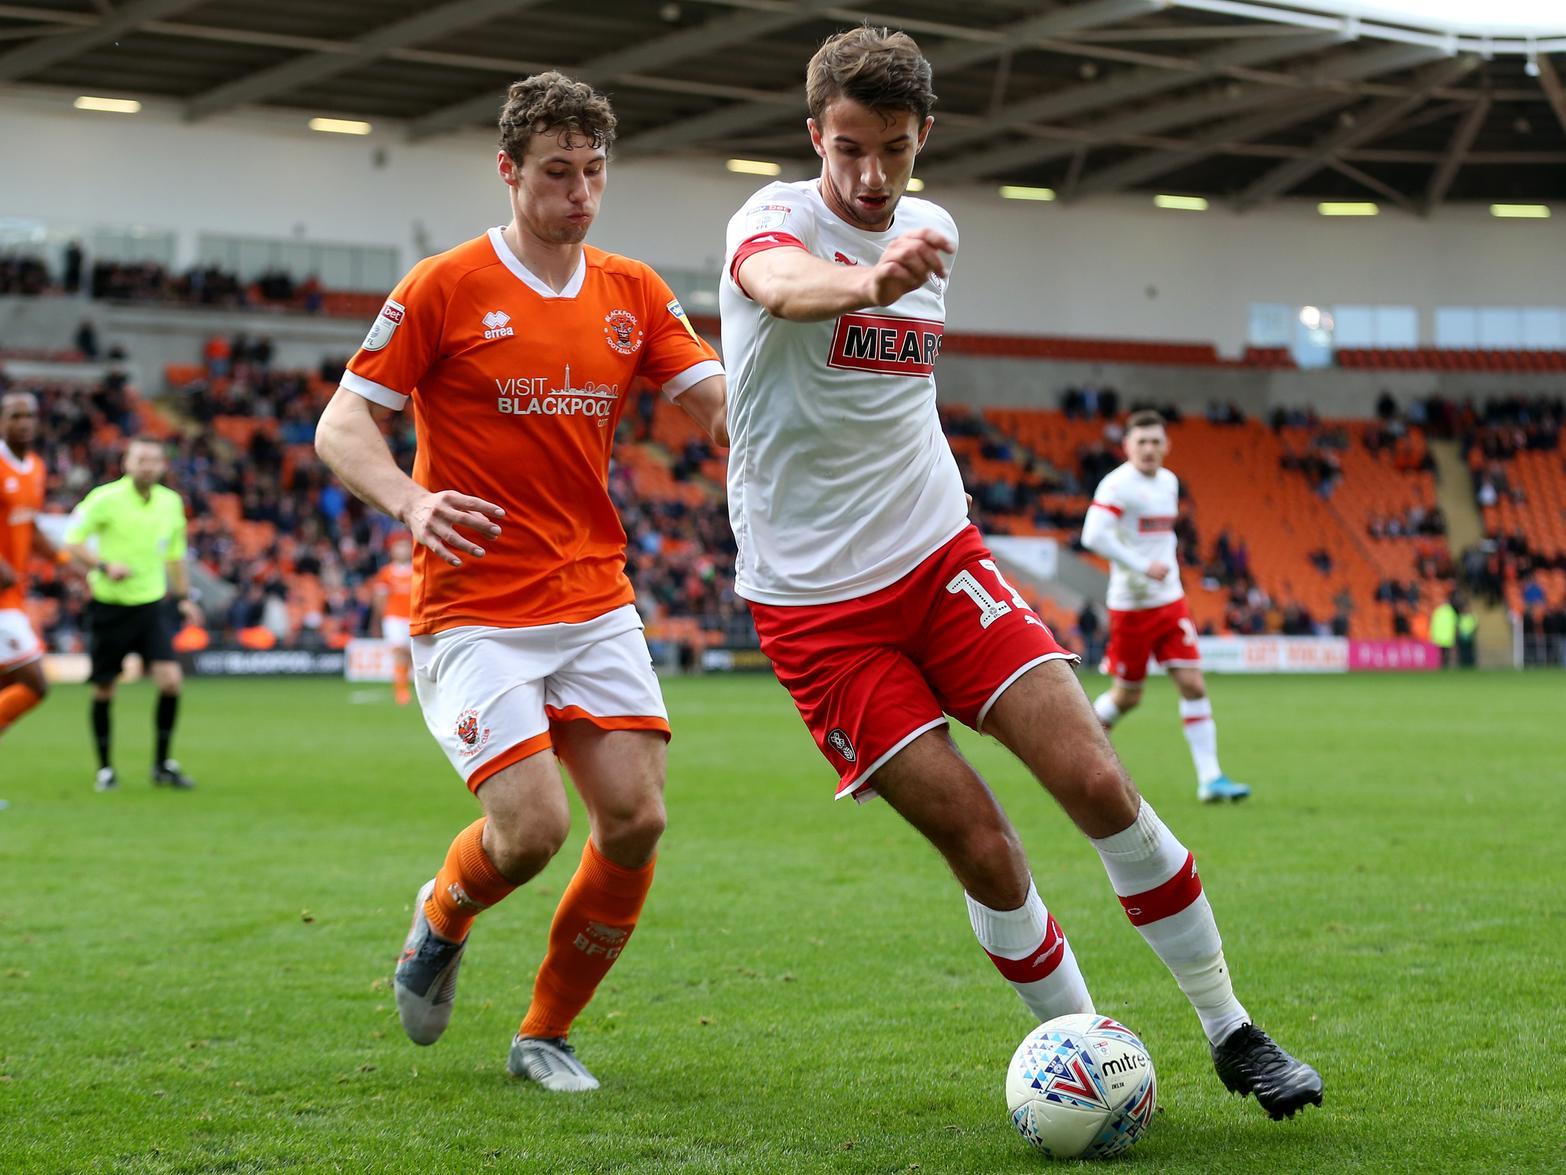 Wigan Athletic and Reading are among a number of Championship sides said to have an interest in Newcastle midfielder Daniel Barlaser, who has been on fire with League One outfit Rotherham. (Daily Mail)